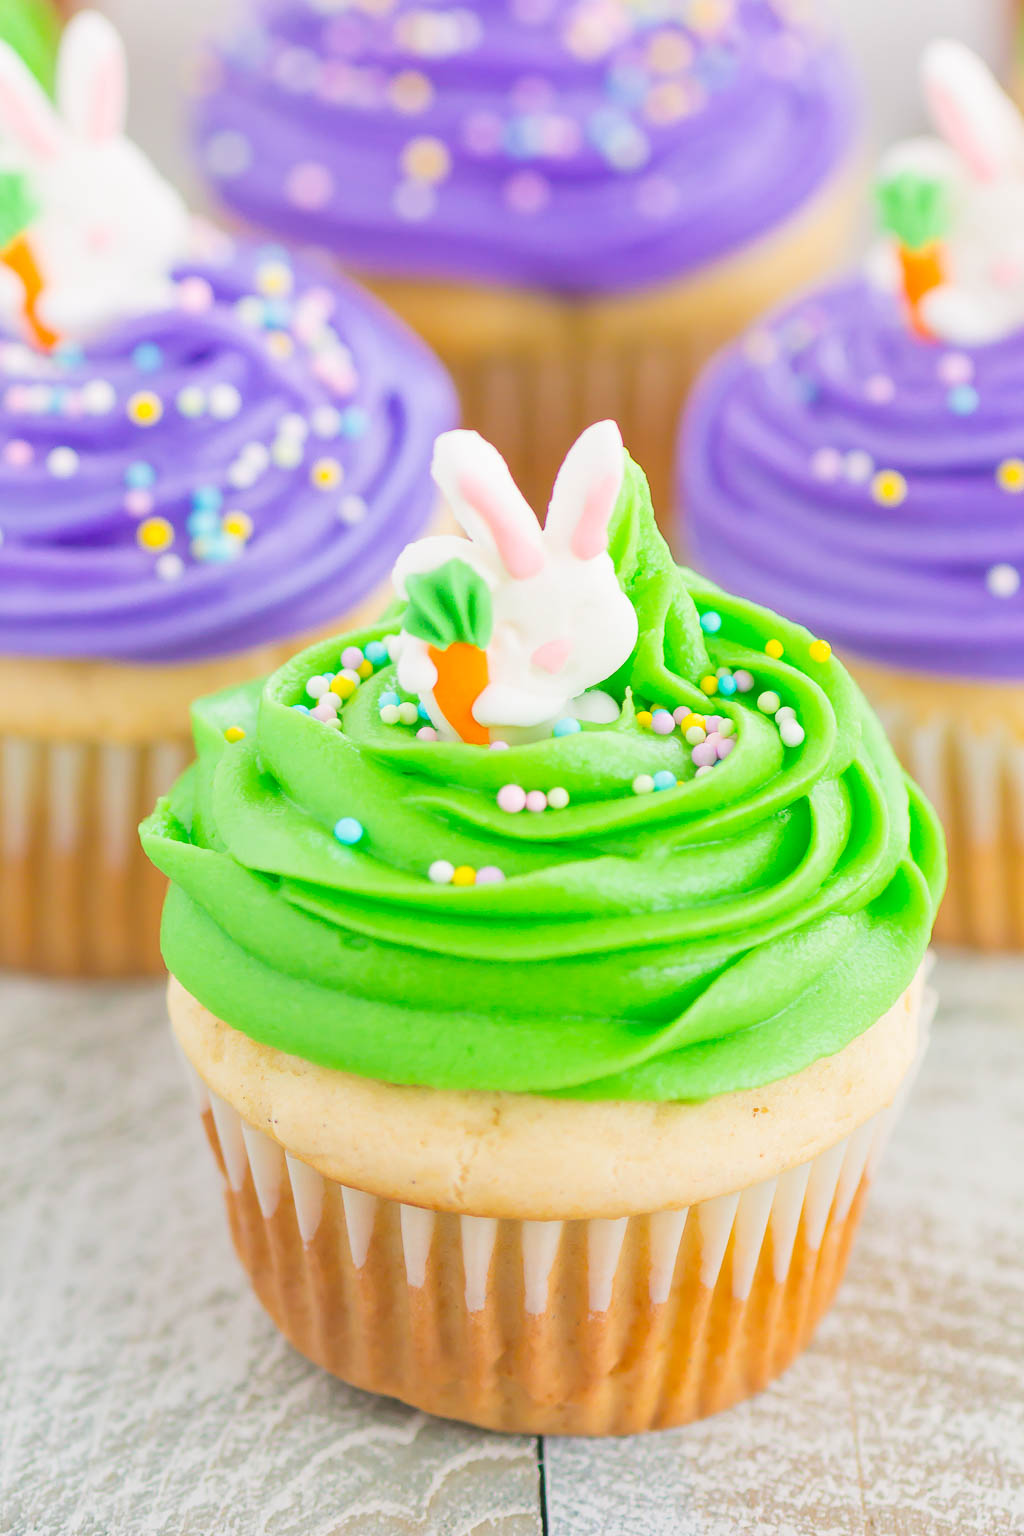 Easter Bunny Cupcakes are an easy and festive dessert to make for spring. A soft and moist yellow cupcake batter is baked until golden and then topped with a simple frosting, pastel sprinkles and a candy bunny. Fun, fast, and flavorful, these adorable cupcakes are perfect for Easter!